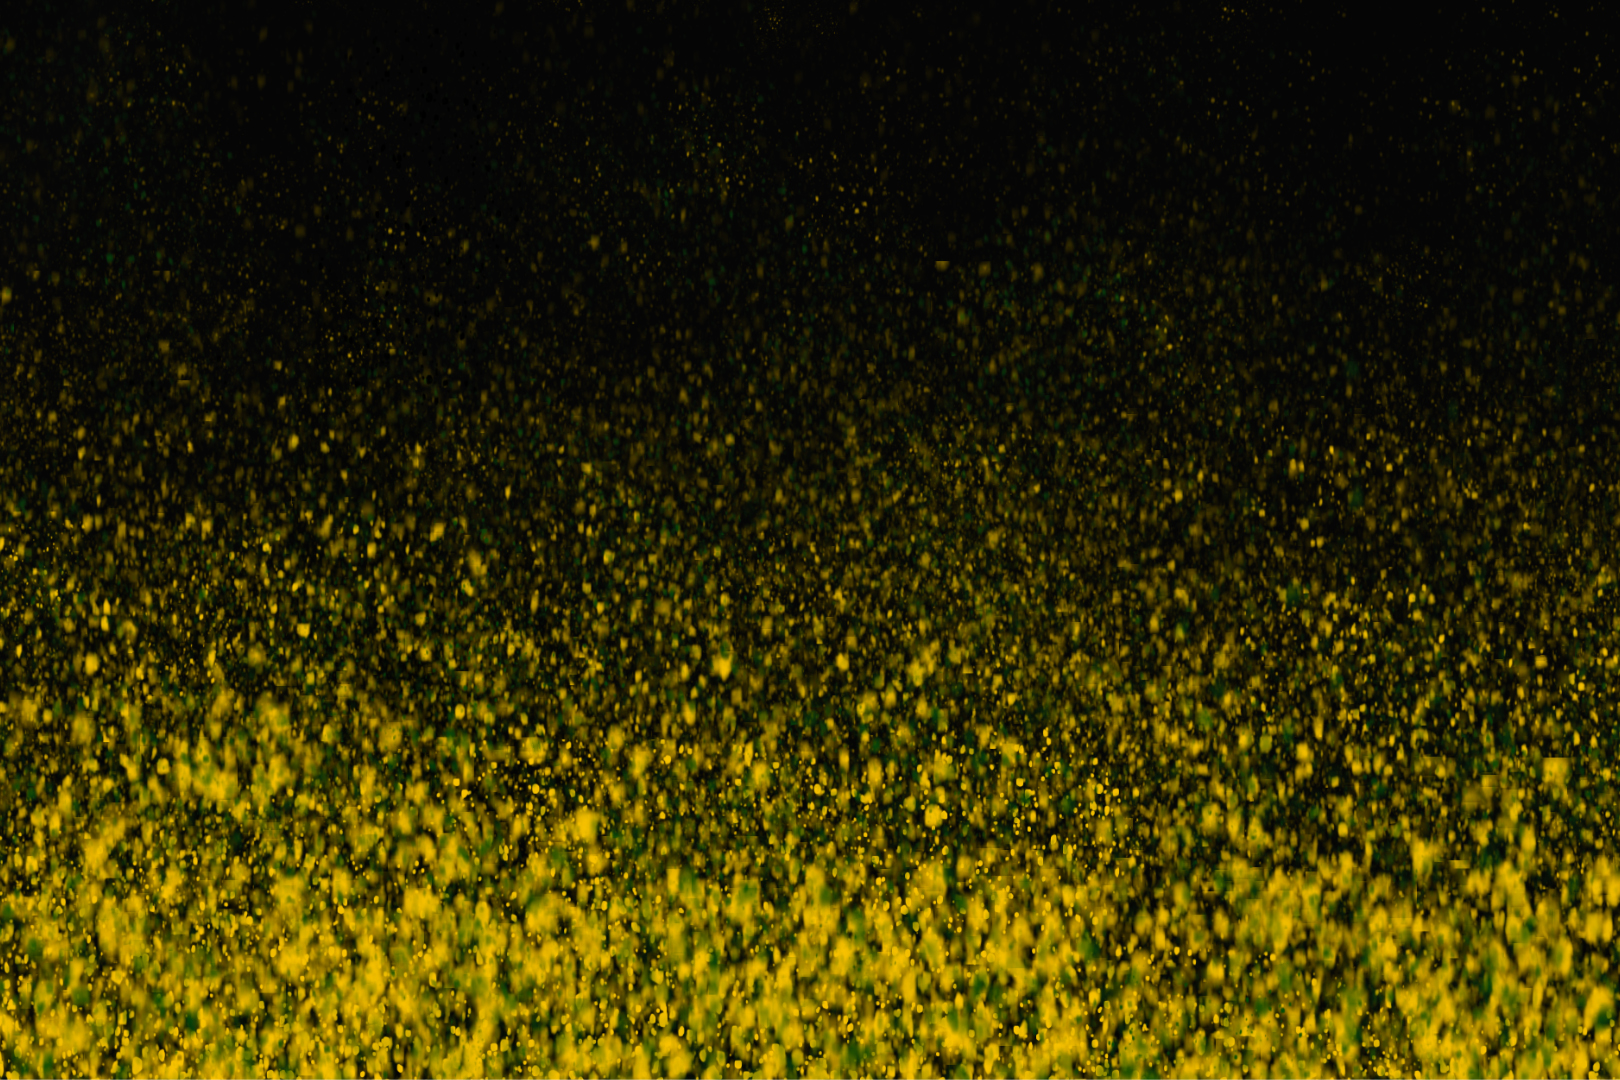 An abstract yellow and black splattered image